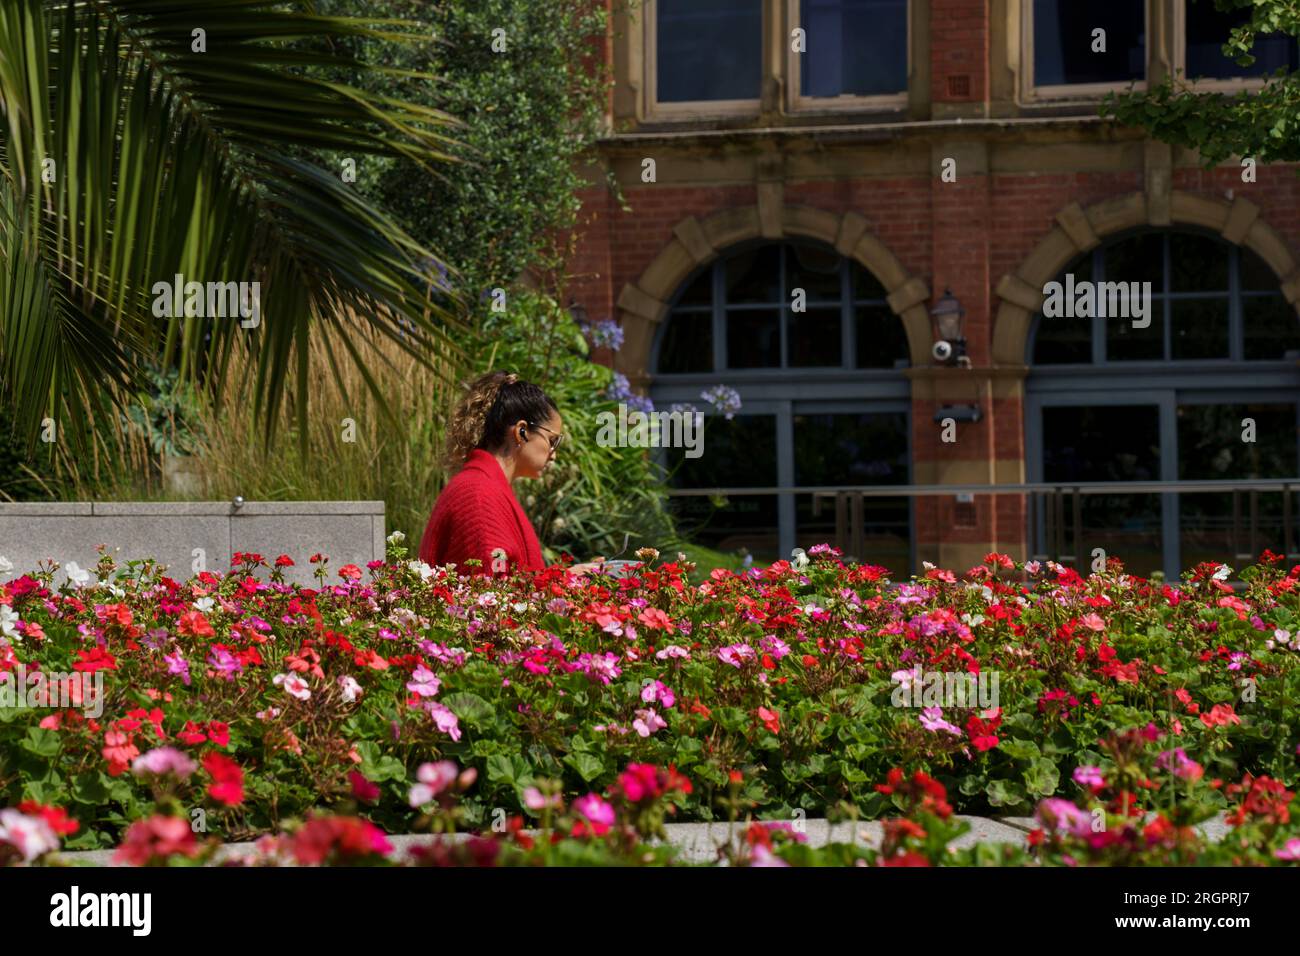 A woman in a red woollen cardigan sits in the background of a serene garden full of red and pink flowers at Millennium Square in Leeds, West Yorkshire Stock Photo